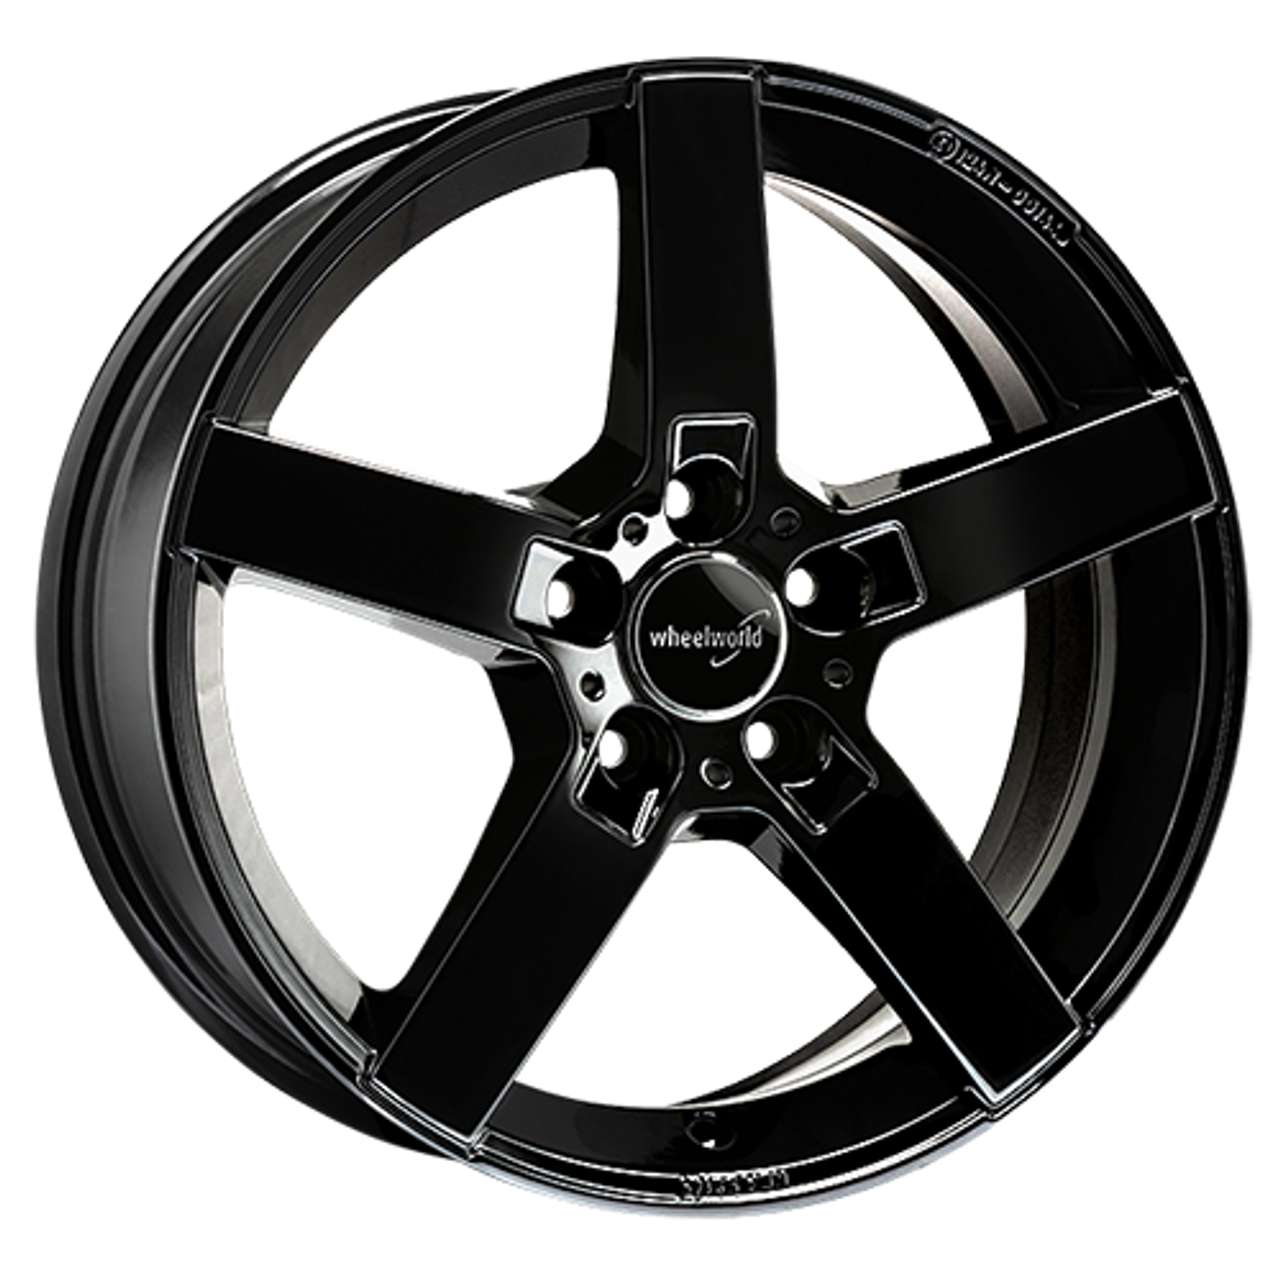 WHEELWORLD-2DRV WH31 black glossy painted 8.0Jx18 5x120 ET43